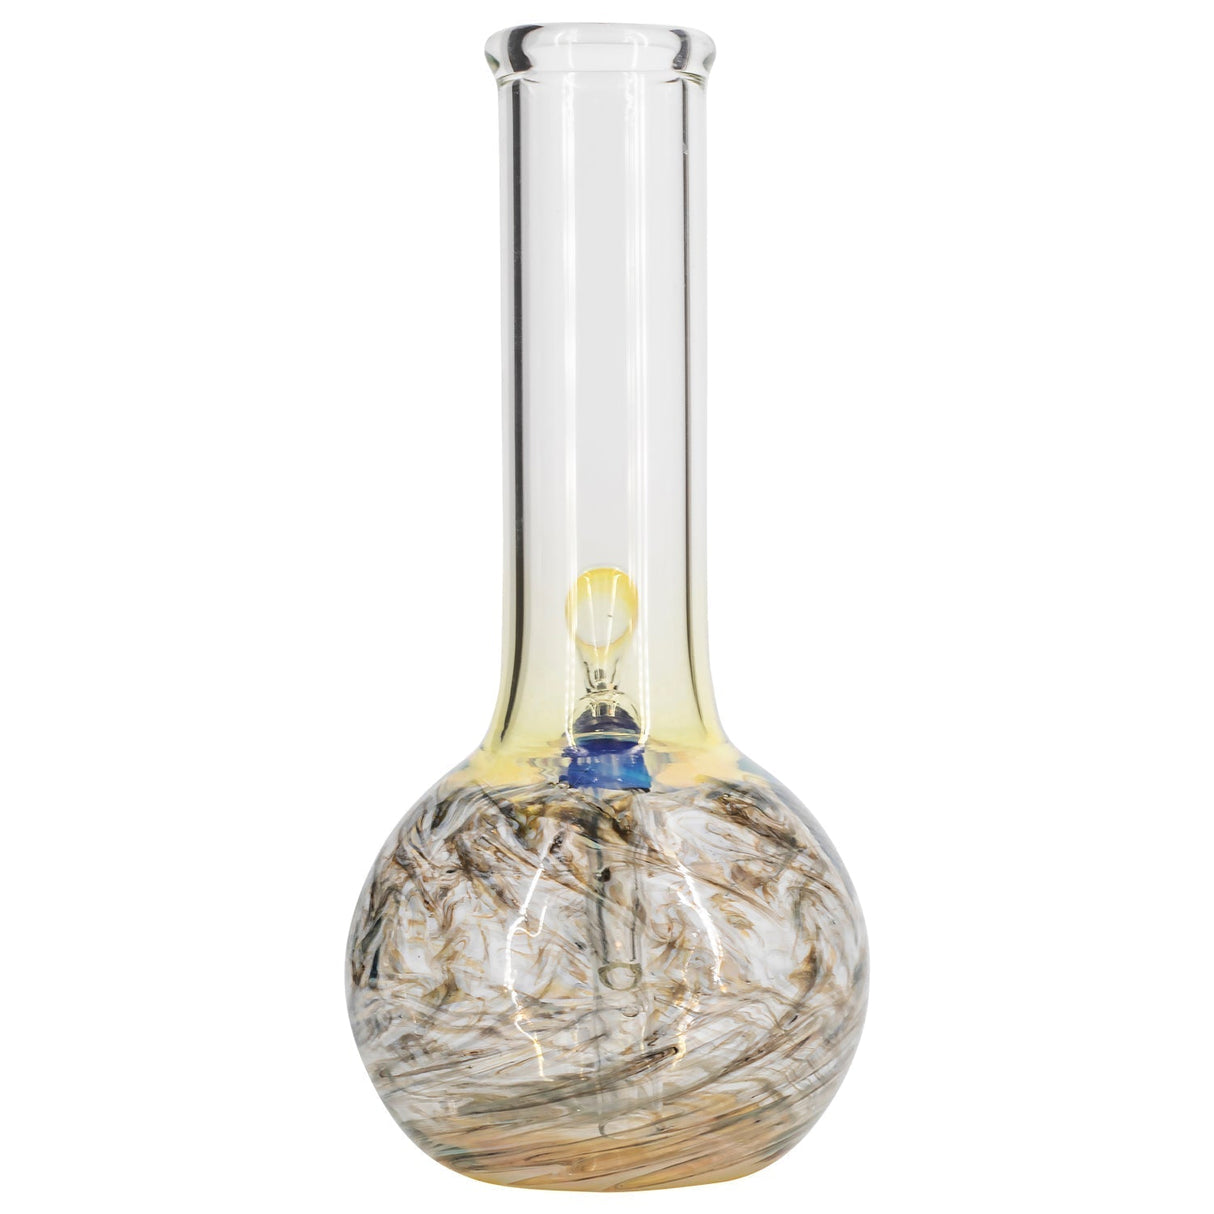 LA Pipes "Jupiter" 12" Bubble Base Bong with Grommet Joint, Front View on White Background